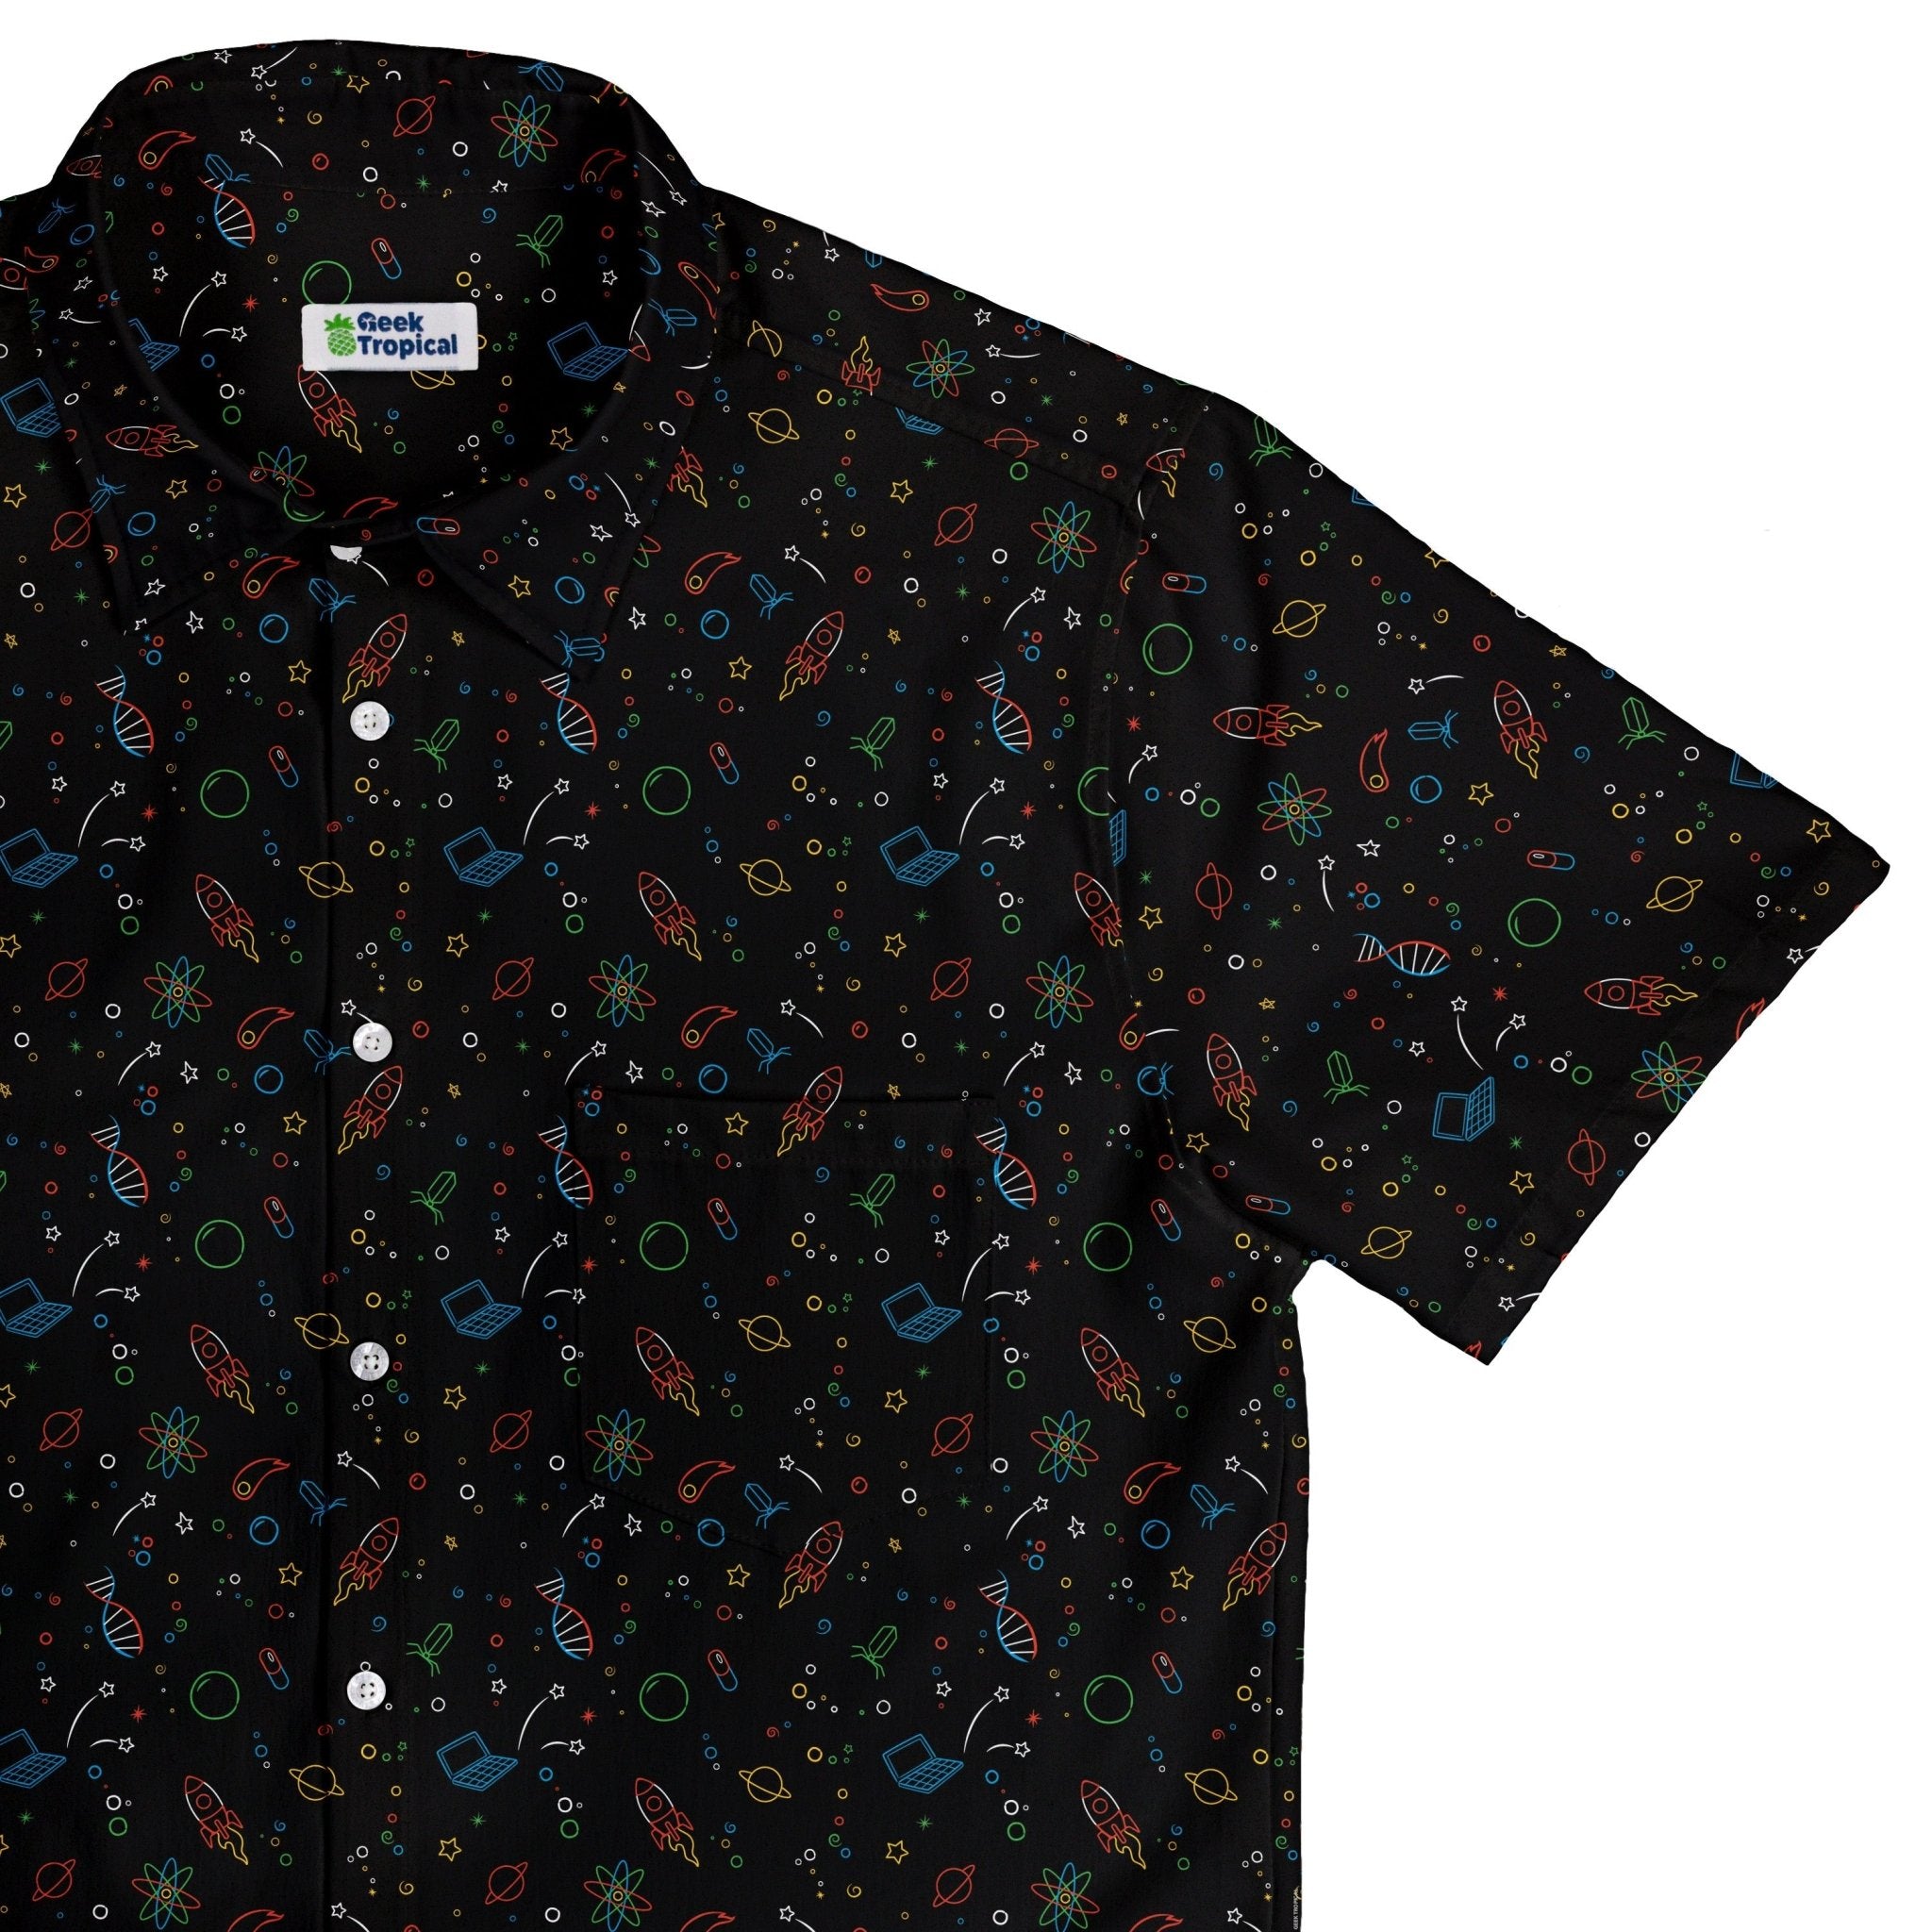 Always Science Icons Button Up Shirt - adult sizing - Design by Tobe Fonseca - Q3 - 2